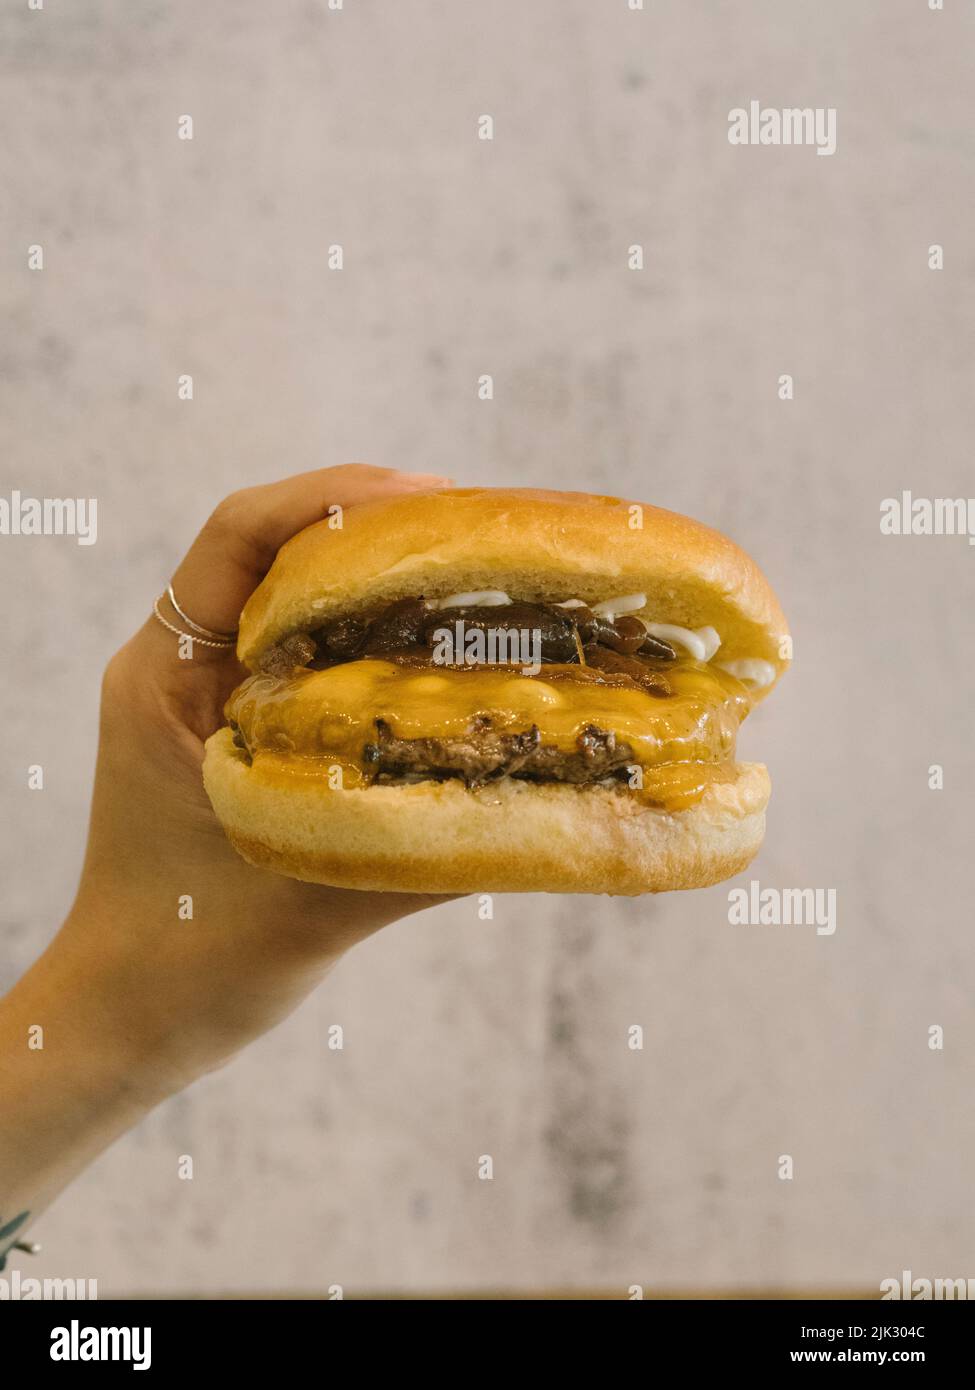 Hand holding Single cheese burger with caramalised onions Stock Photo